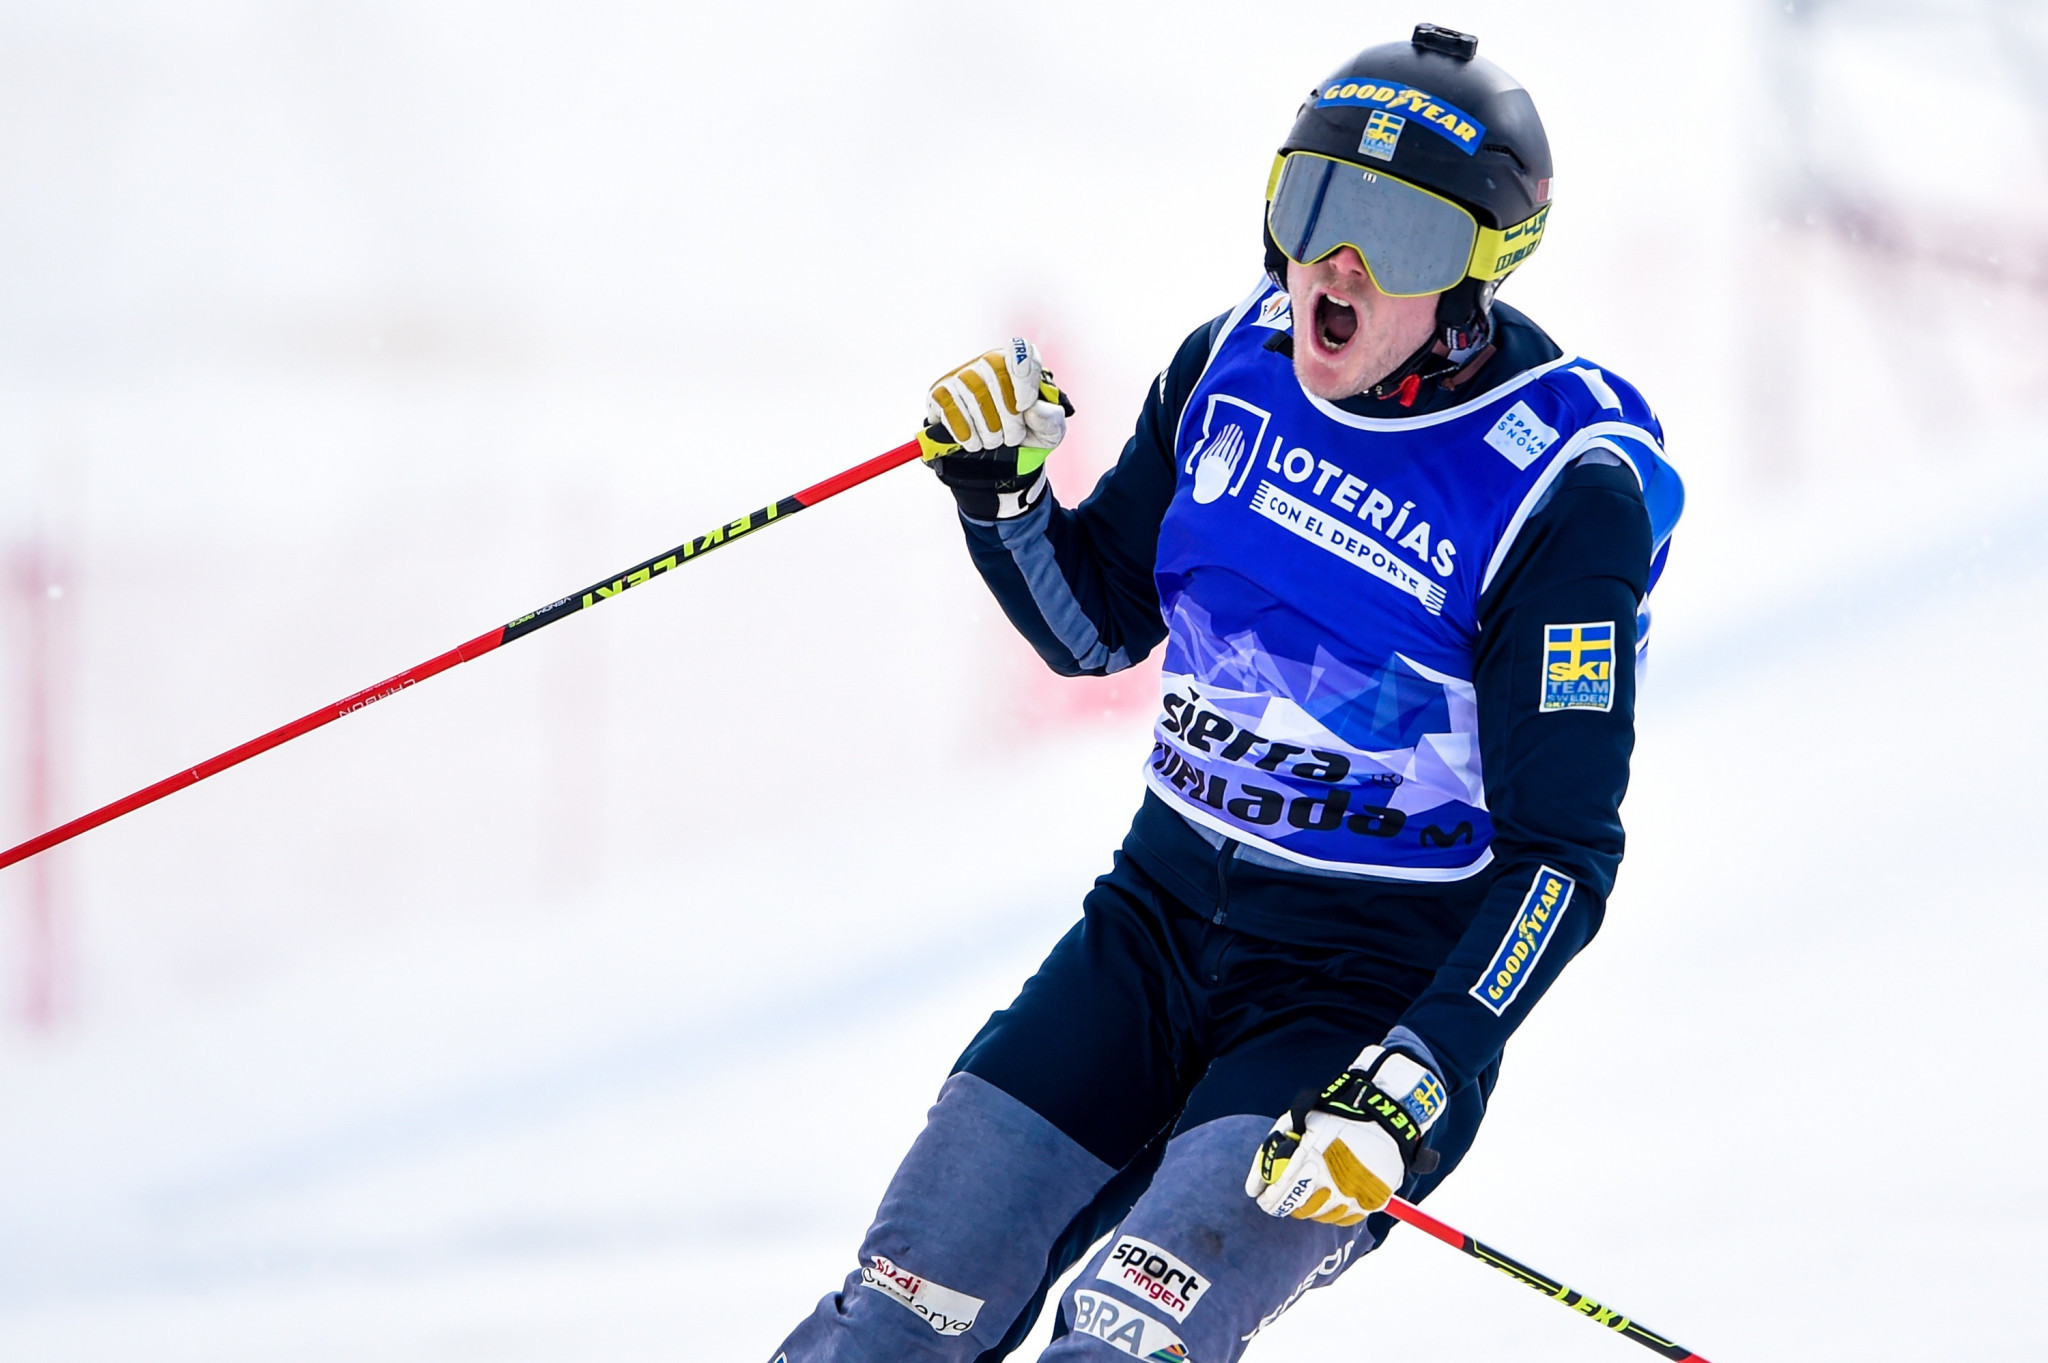 Home favourites dominate first day of qualification at FIS Ski Cross World Cup in Idre Fjäll